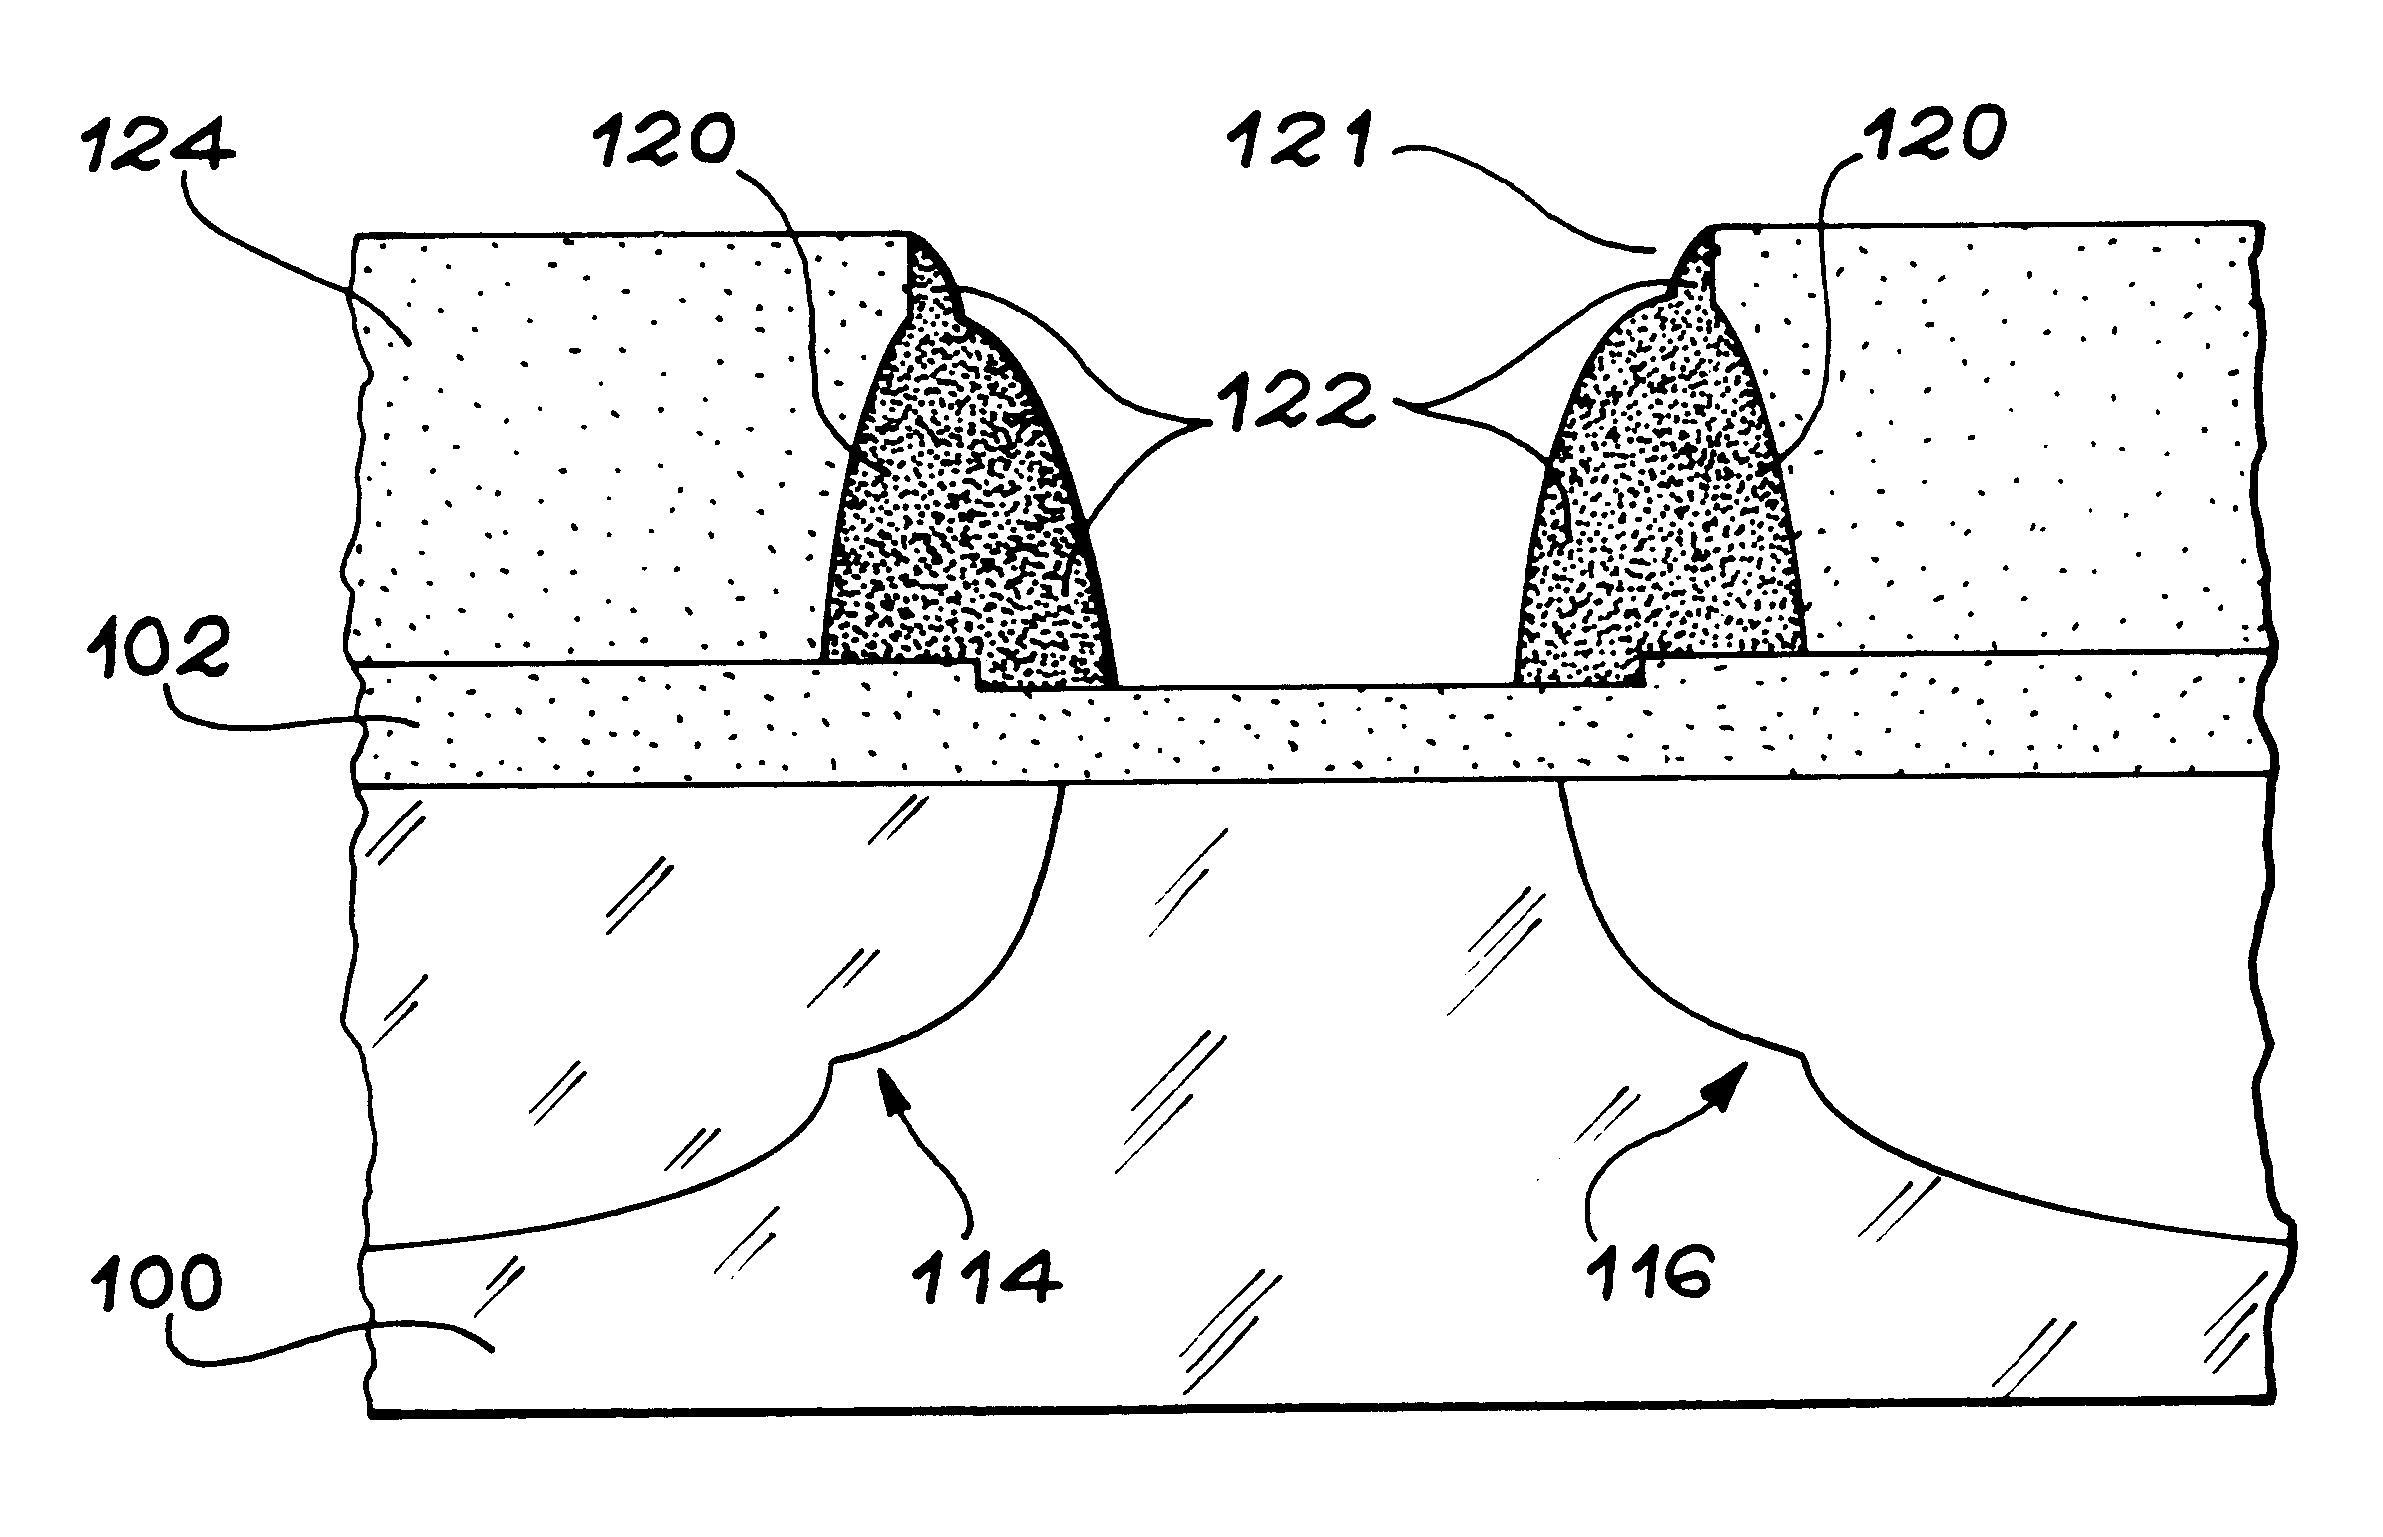 MIS transistor and method for making same on a semiconductor substrate